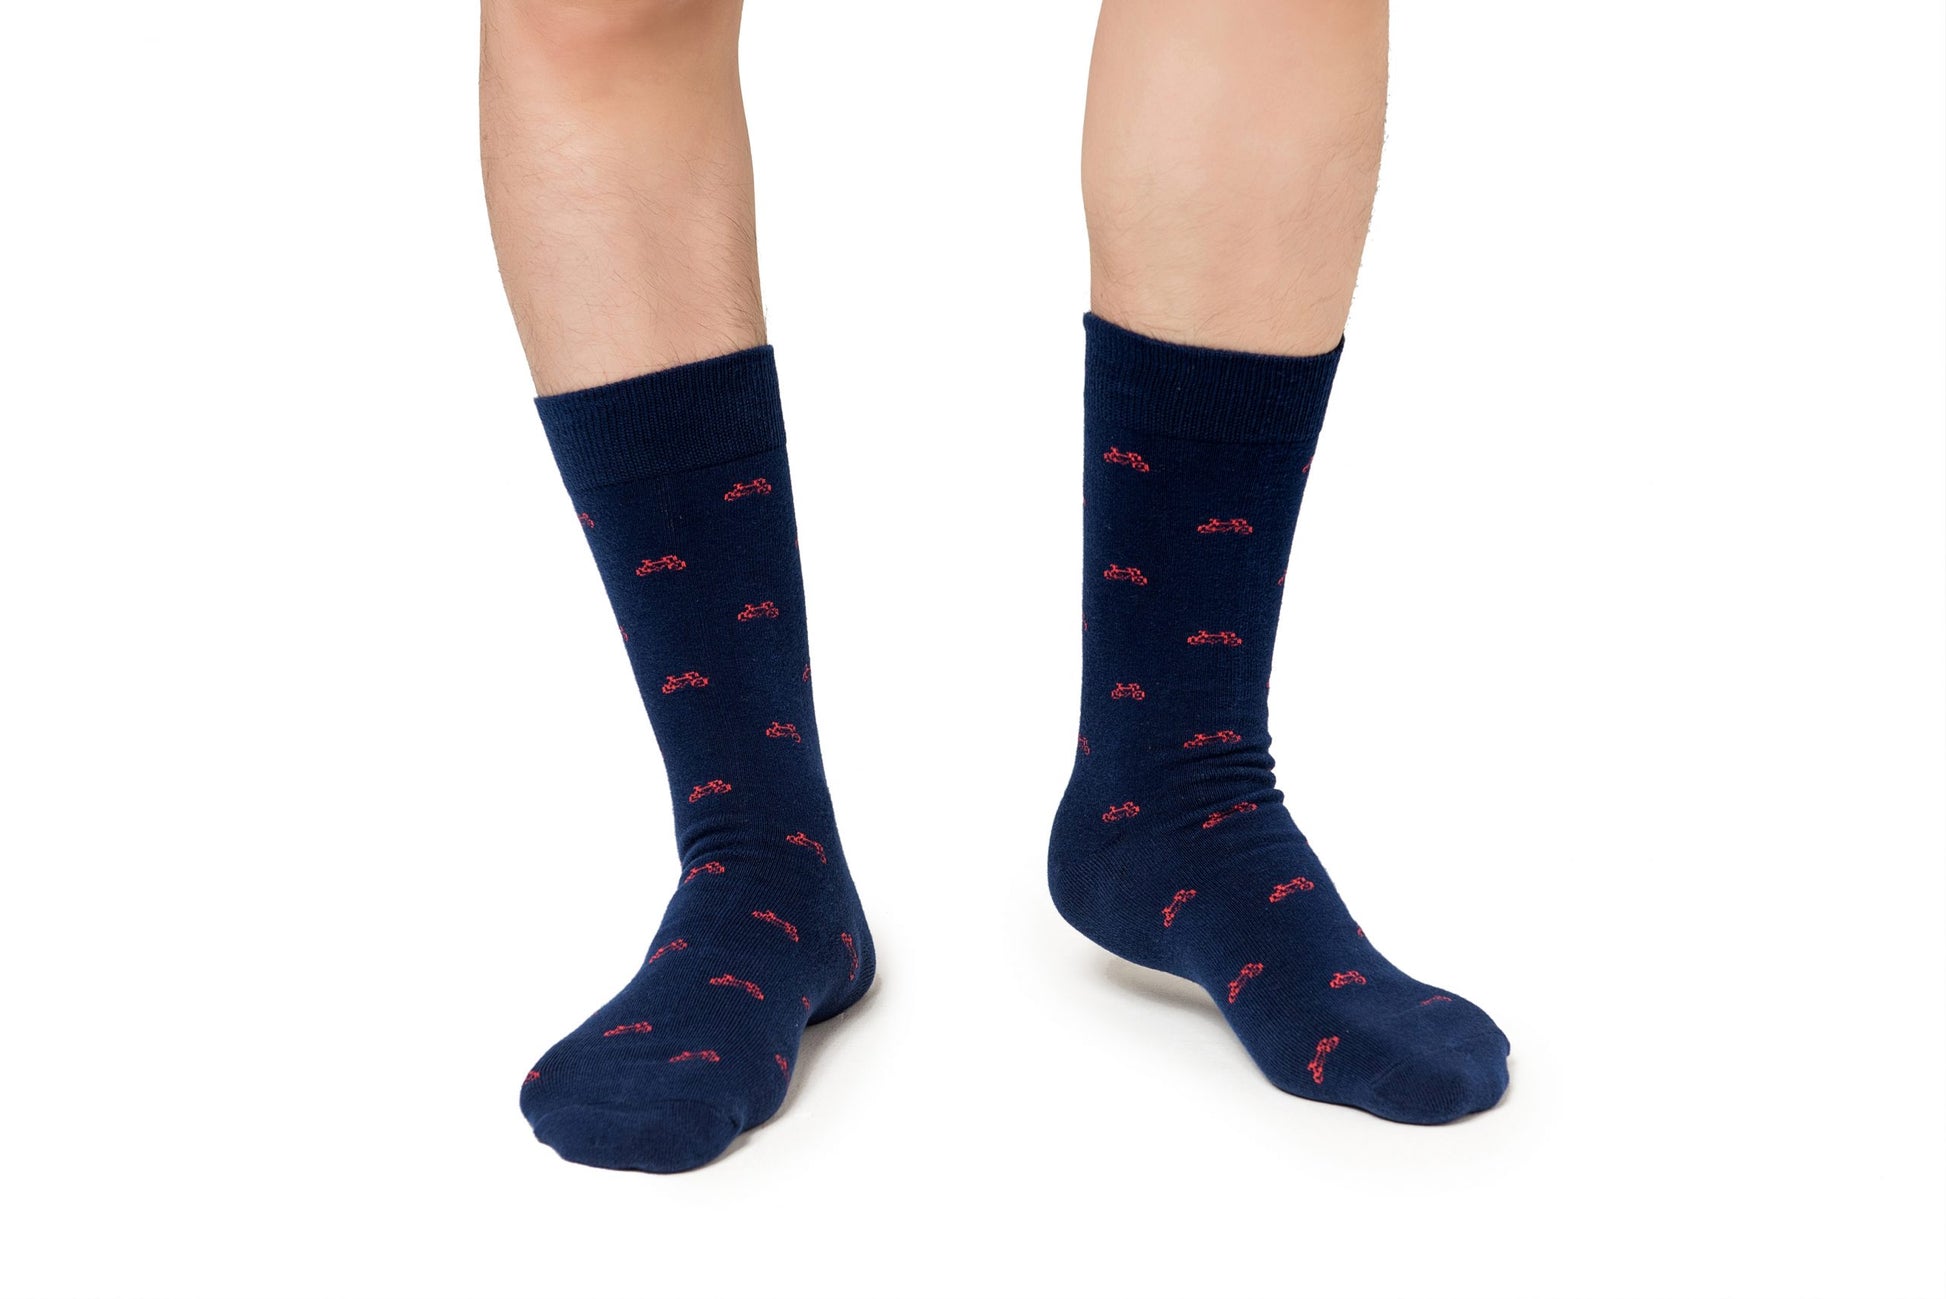 A man wearing a pair of Cyclist Bike Socks with red birds on them.